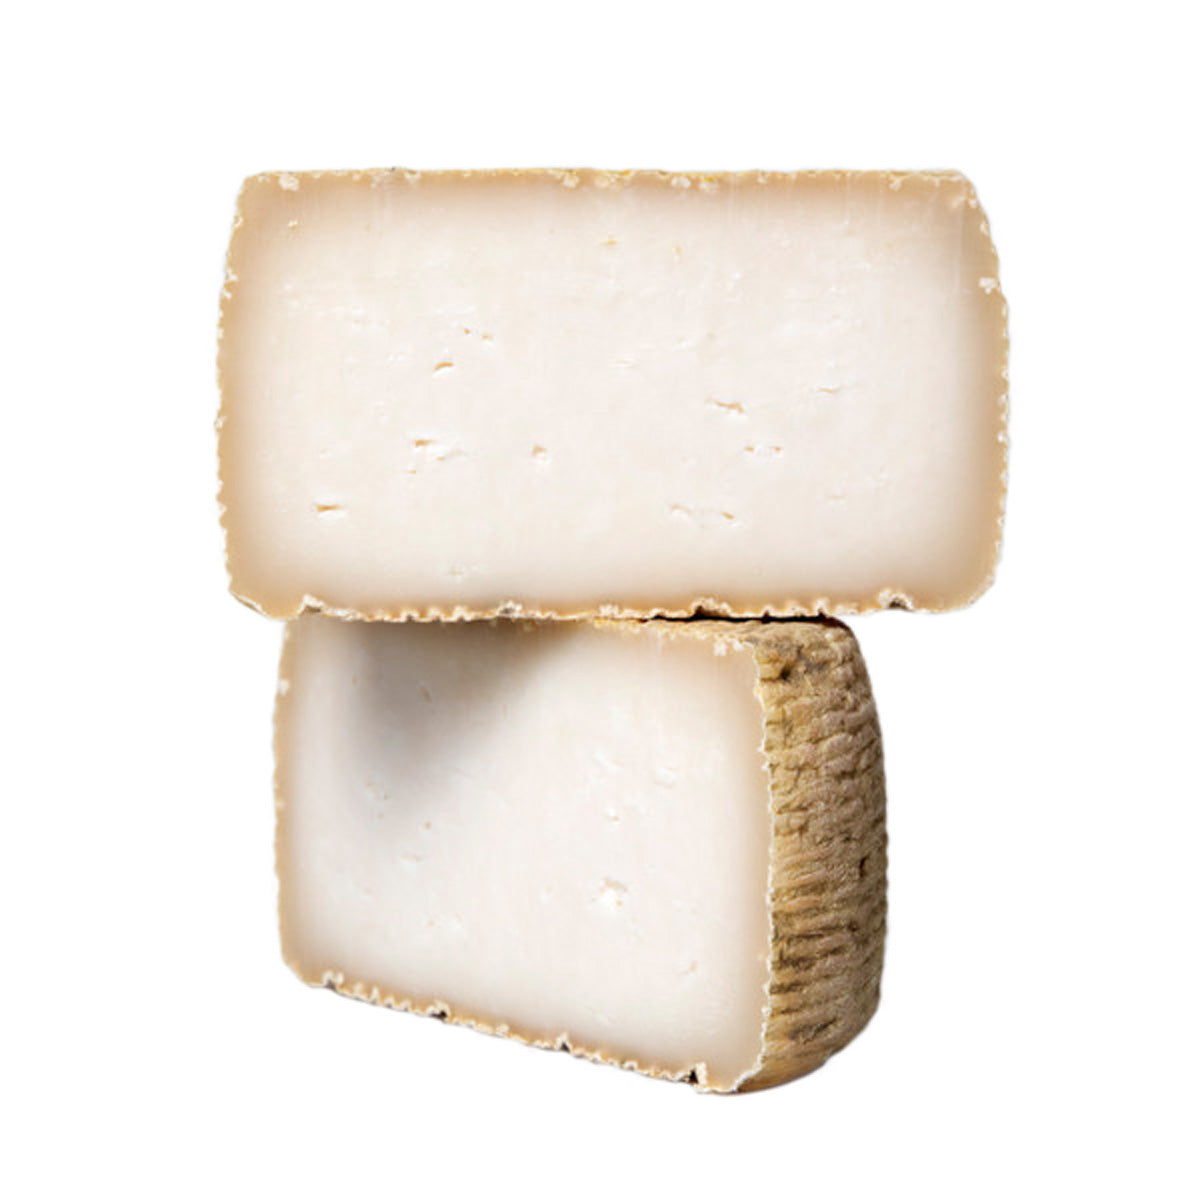 Murray's Cave Aged Buttermilk Basque Cheese